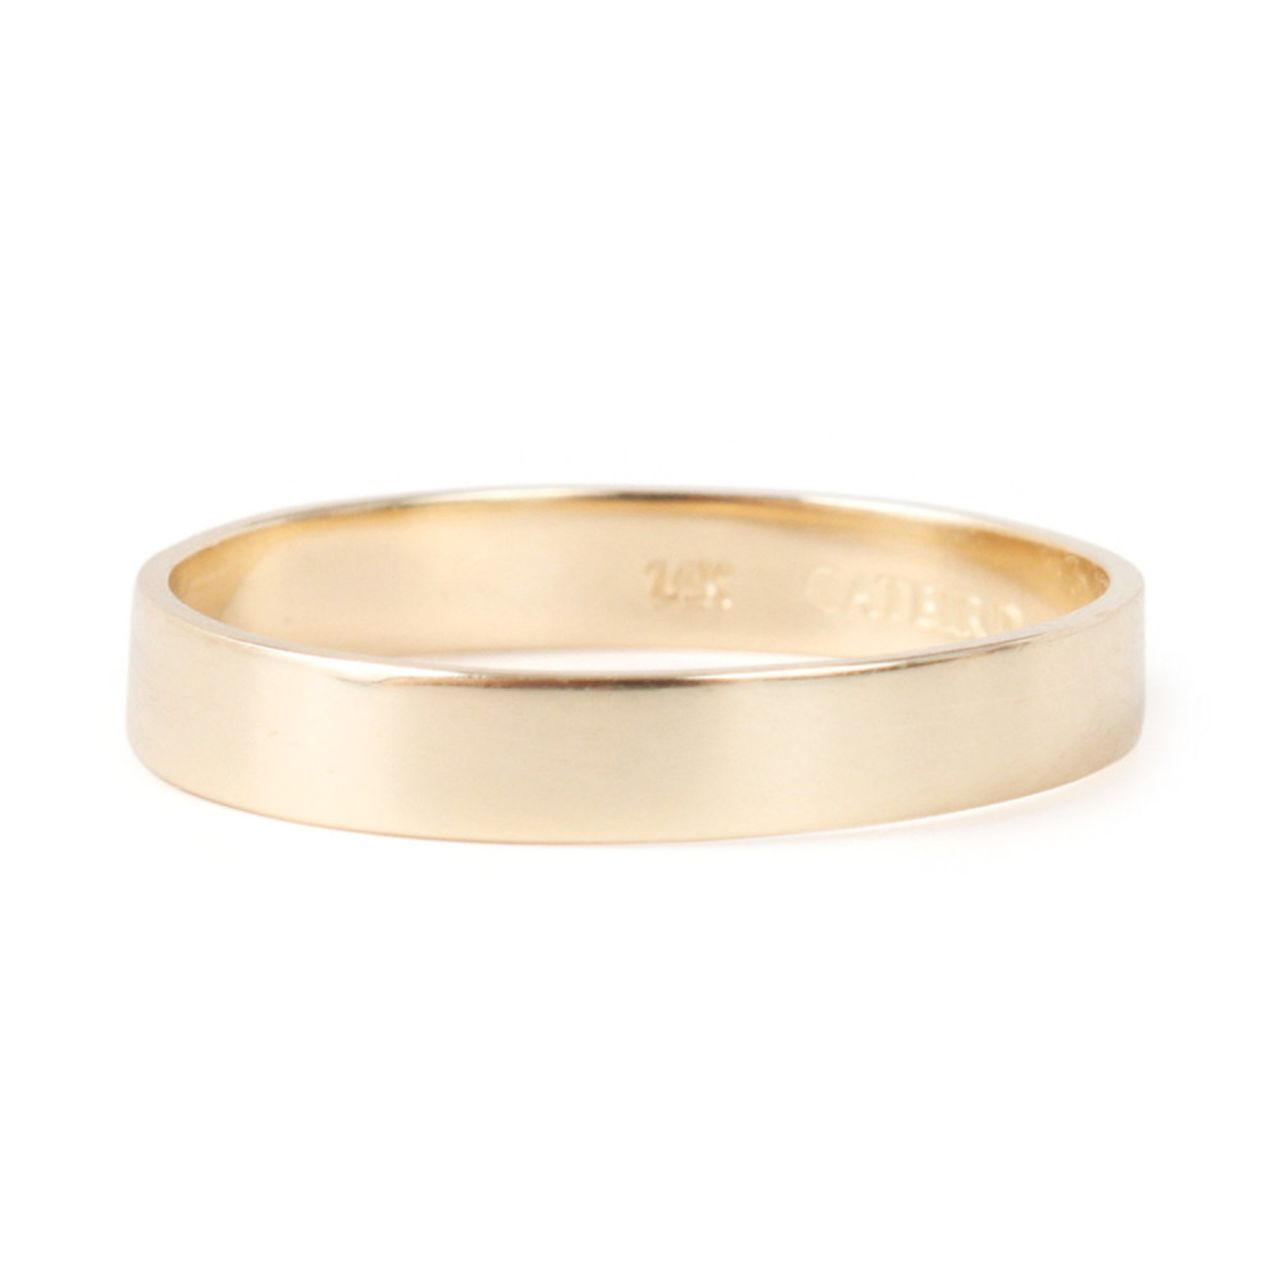 "On several occasions, men have chosen a <a href="http://www.catbirdnyc.com/catbird-classic-wedding-bands-half-round-band-3mm.html" target="_blank" target="_blank">Classic Wedding Band</a> as their engagement ring! I also had one couple do a Tomboy ring on his pinky for their engagement! That way he could wear both rings (wedding band later) together eventually." -- Jessica Miller, Store & Wedding Annex Manager at <a href="http://www.catbirdnyc.com/" target="_blank" target="_blank">Catbird </a>